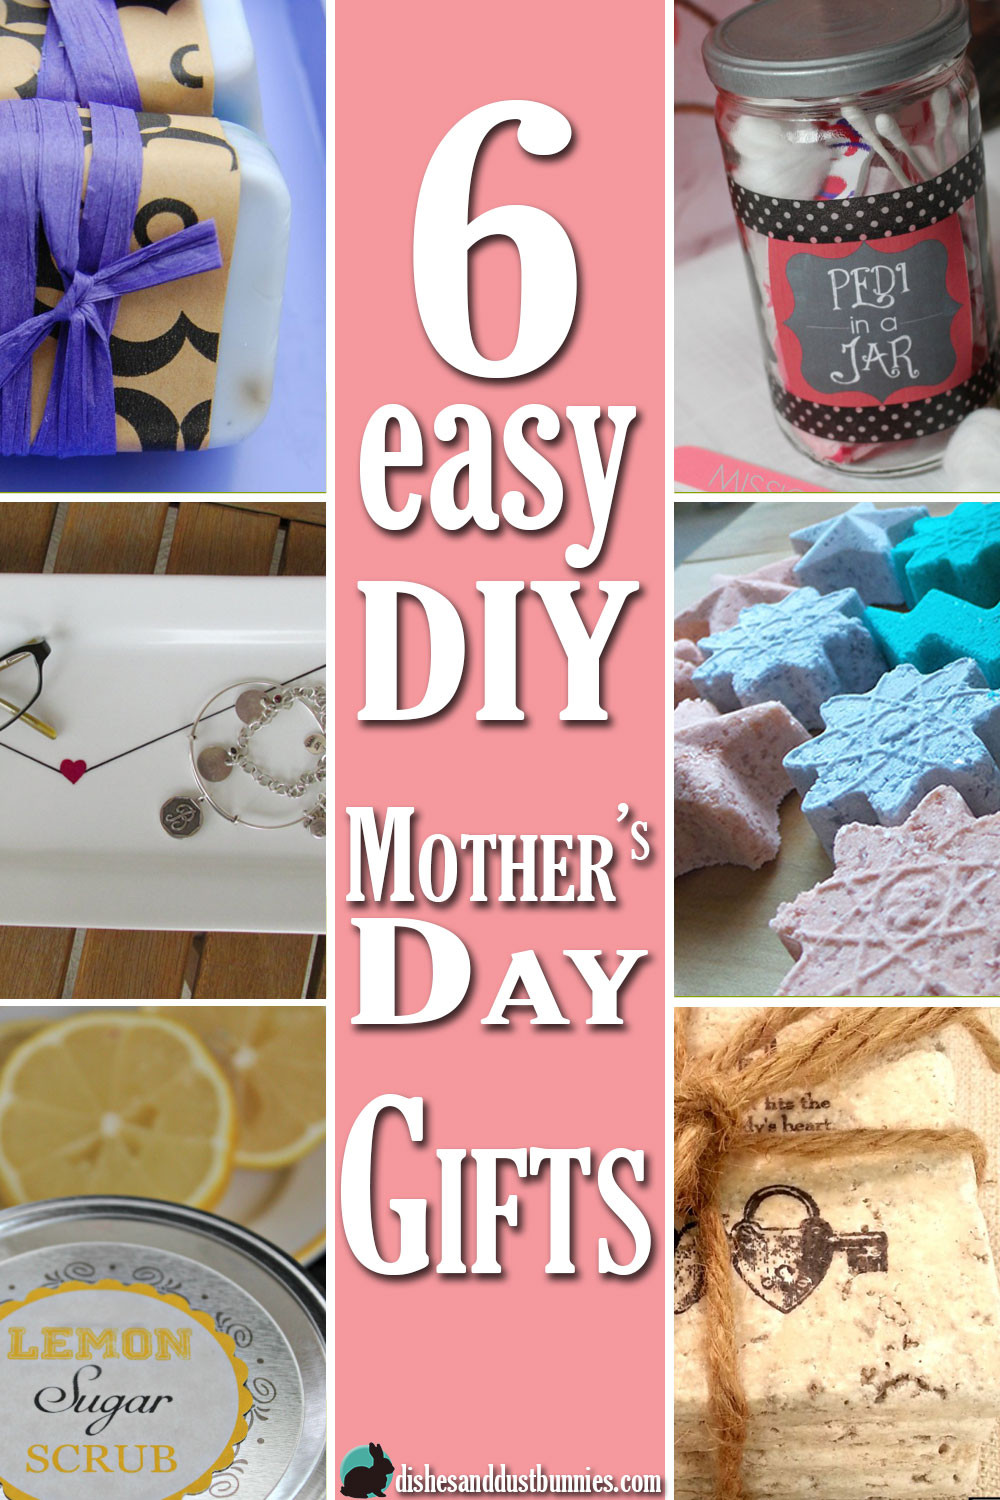 Easy DIY Mother'S Day Gift Ideas
 6 Easy DIY Mother s Day Gifts Dishes and Dust Bunnies